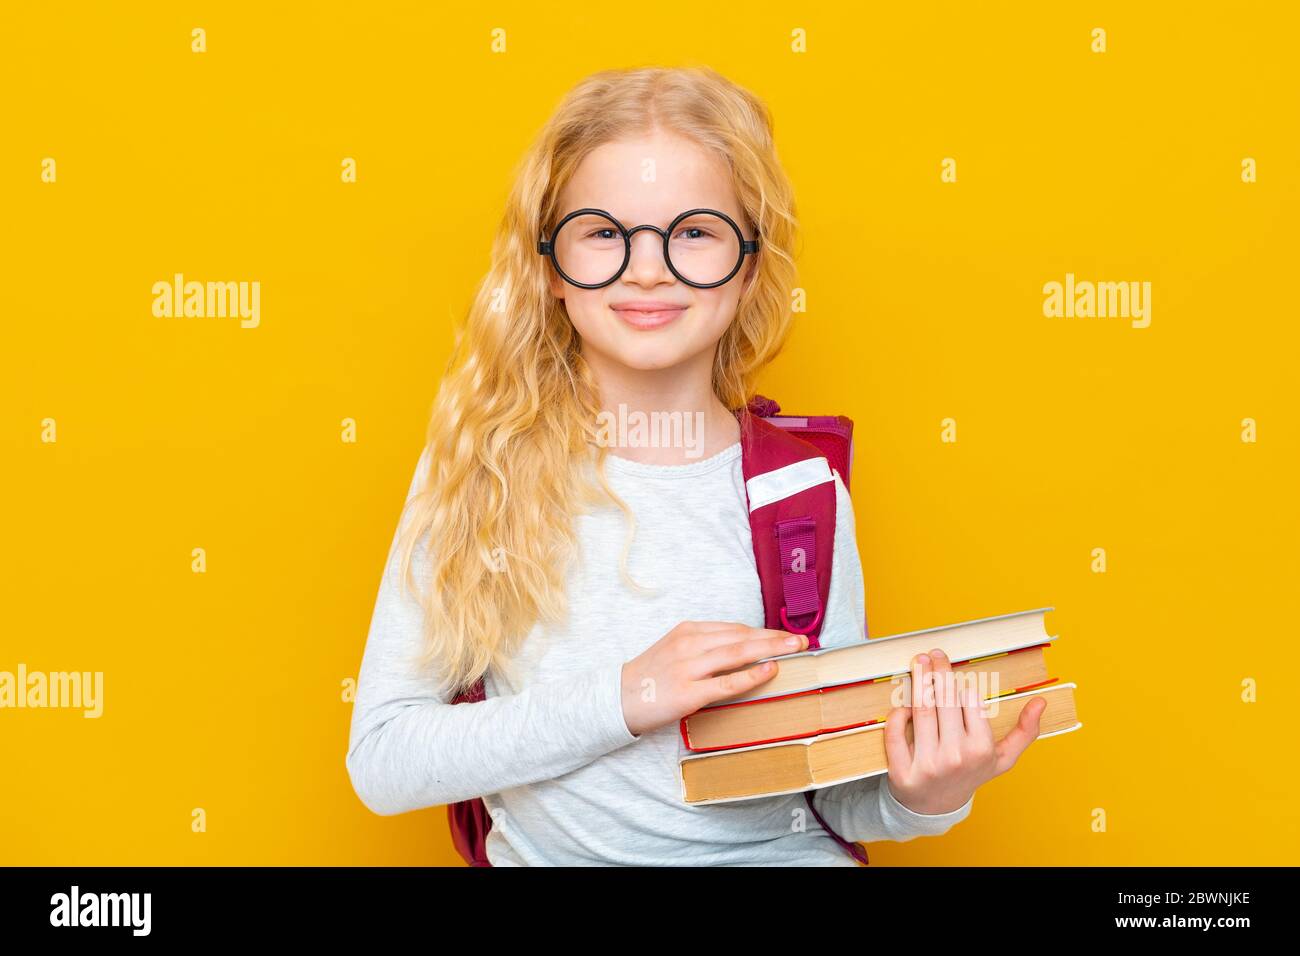 Back to school. Portrait of blonde school girl in round glasses with bag and books. Yellow studio background. Education. smiling at camera. Stock Photo